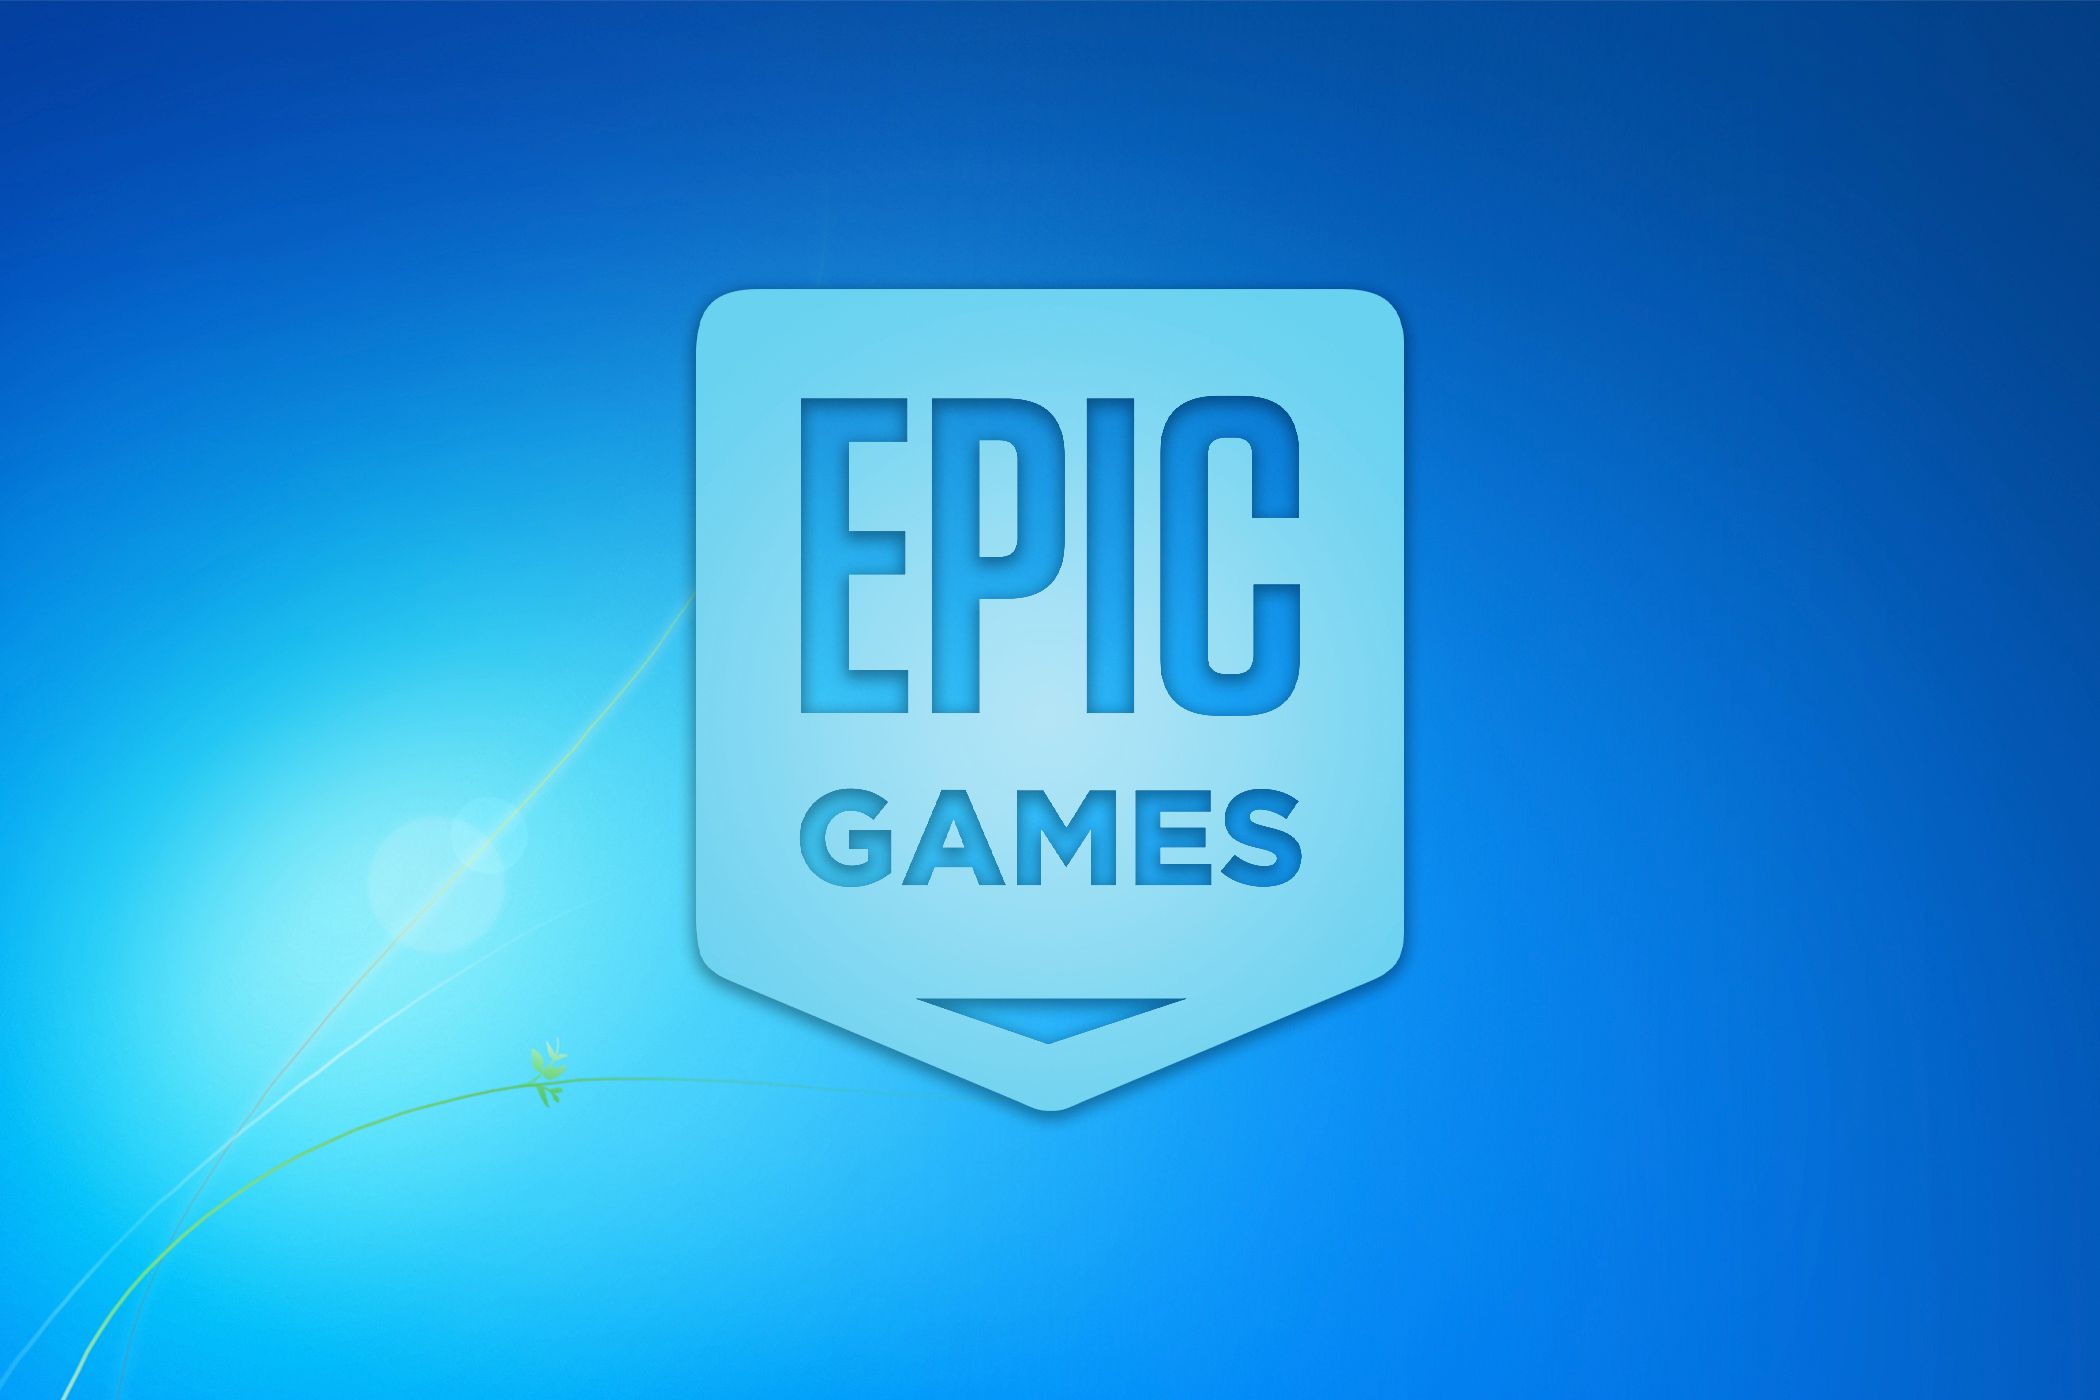 The Epic Games logo over the default Windows 7 background.